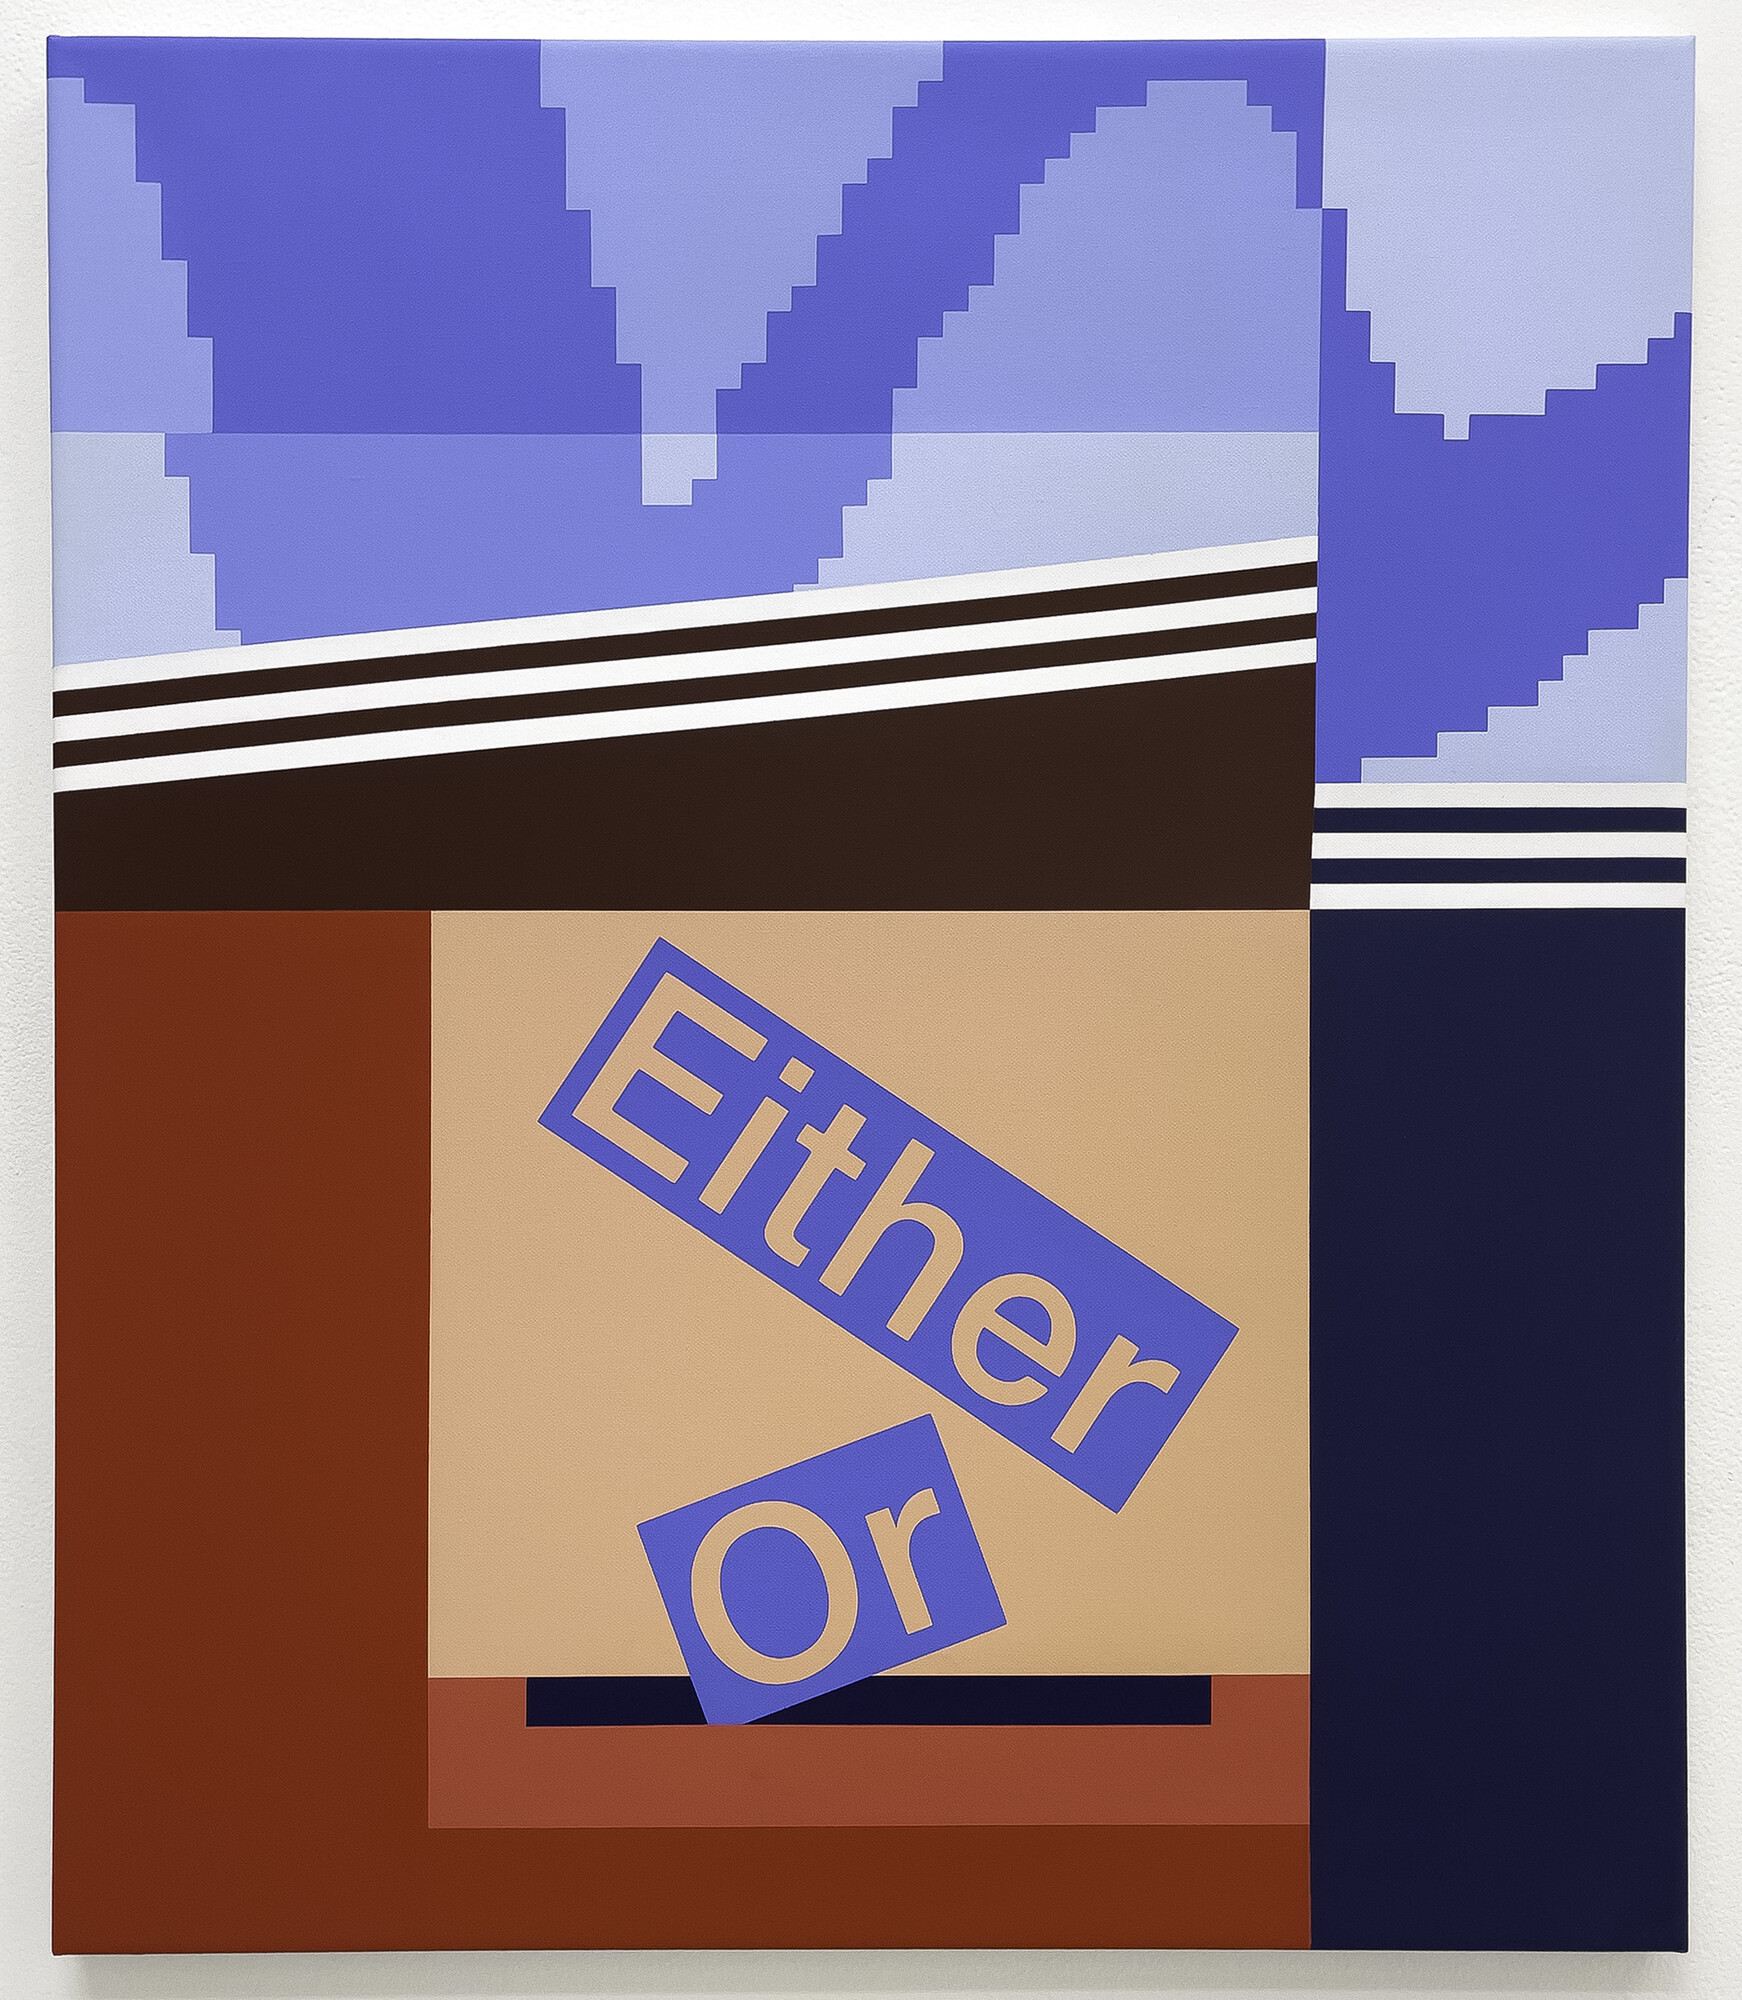 Ella Sutherland, <em>Humours of an Election</em>, 2022, acrylic on linen, 76 x 66 x 2 cm. Courtesy of Futures and Sumer gallery, New Zealand.